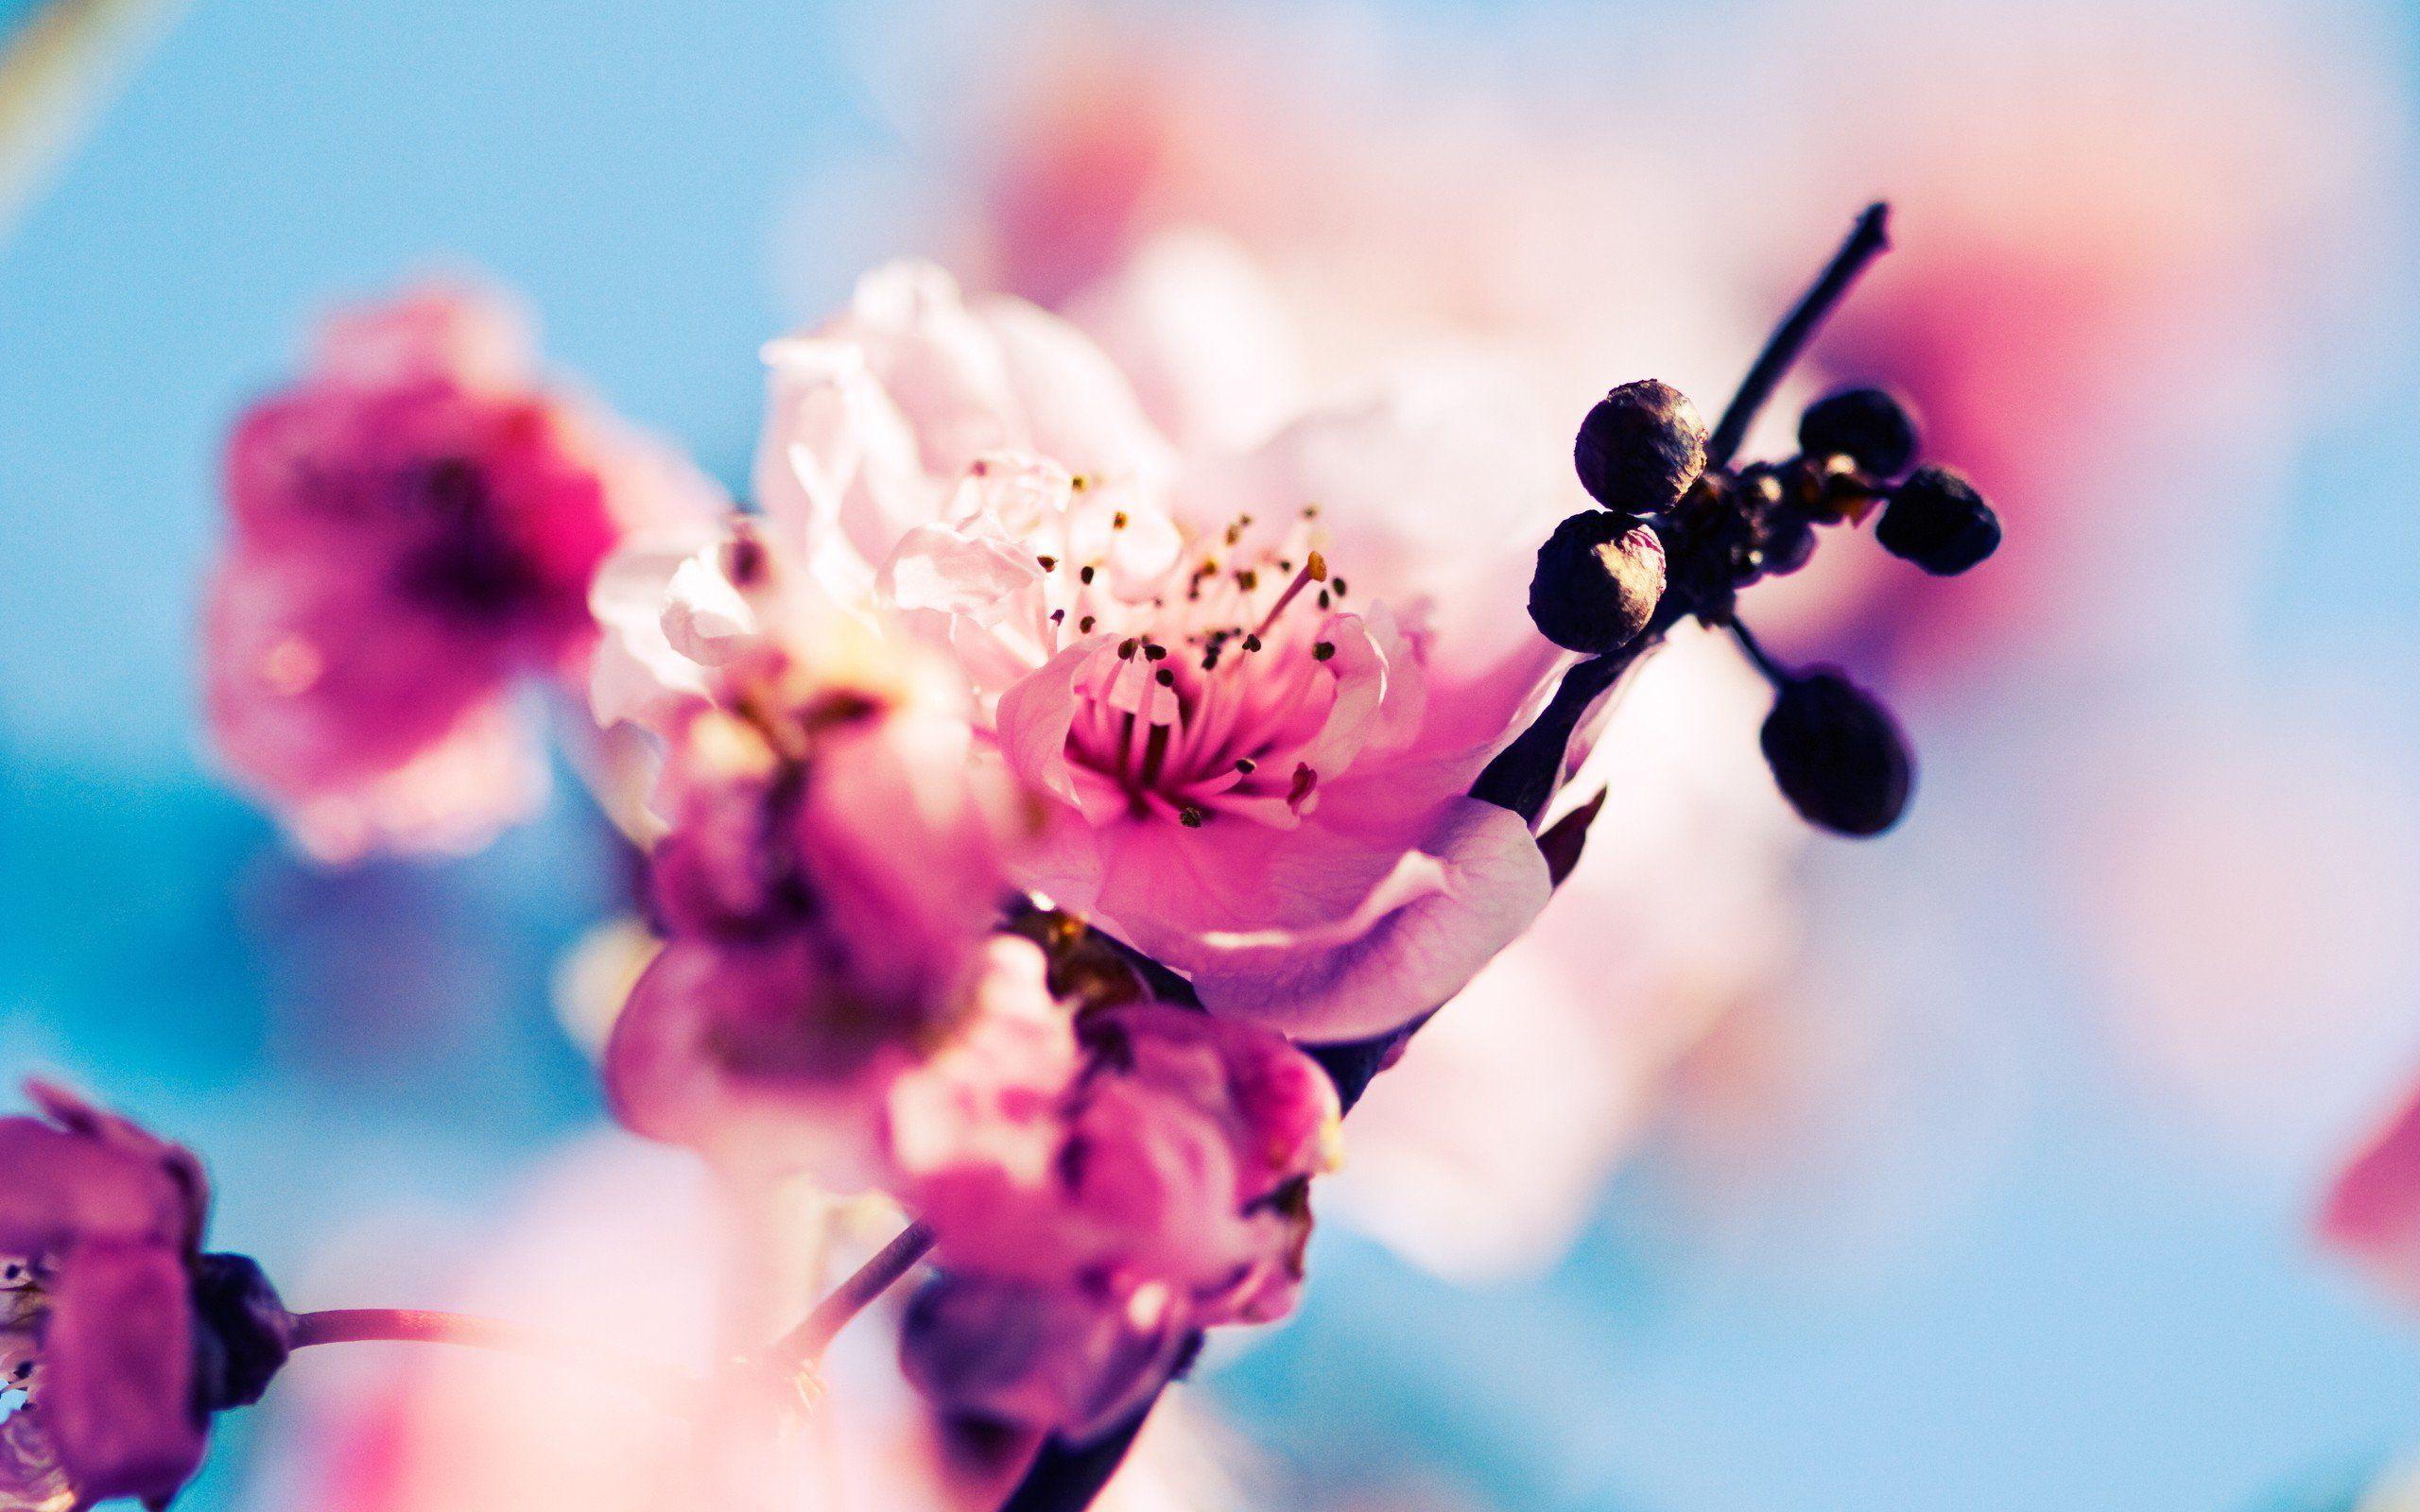 Tired of winter? Get ready for spring with these 48 HD wallpaper